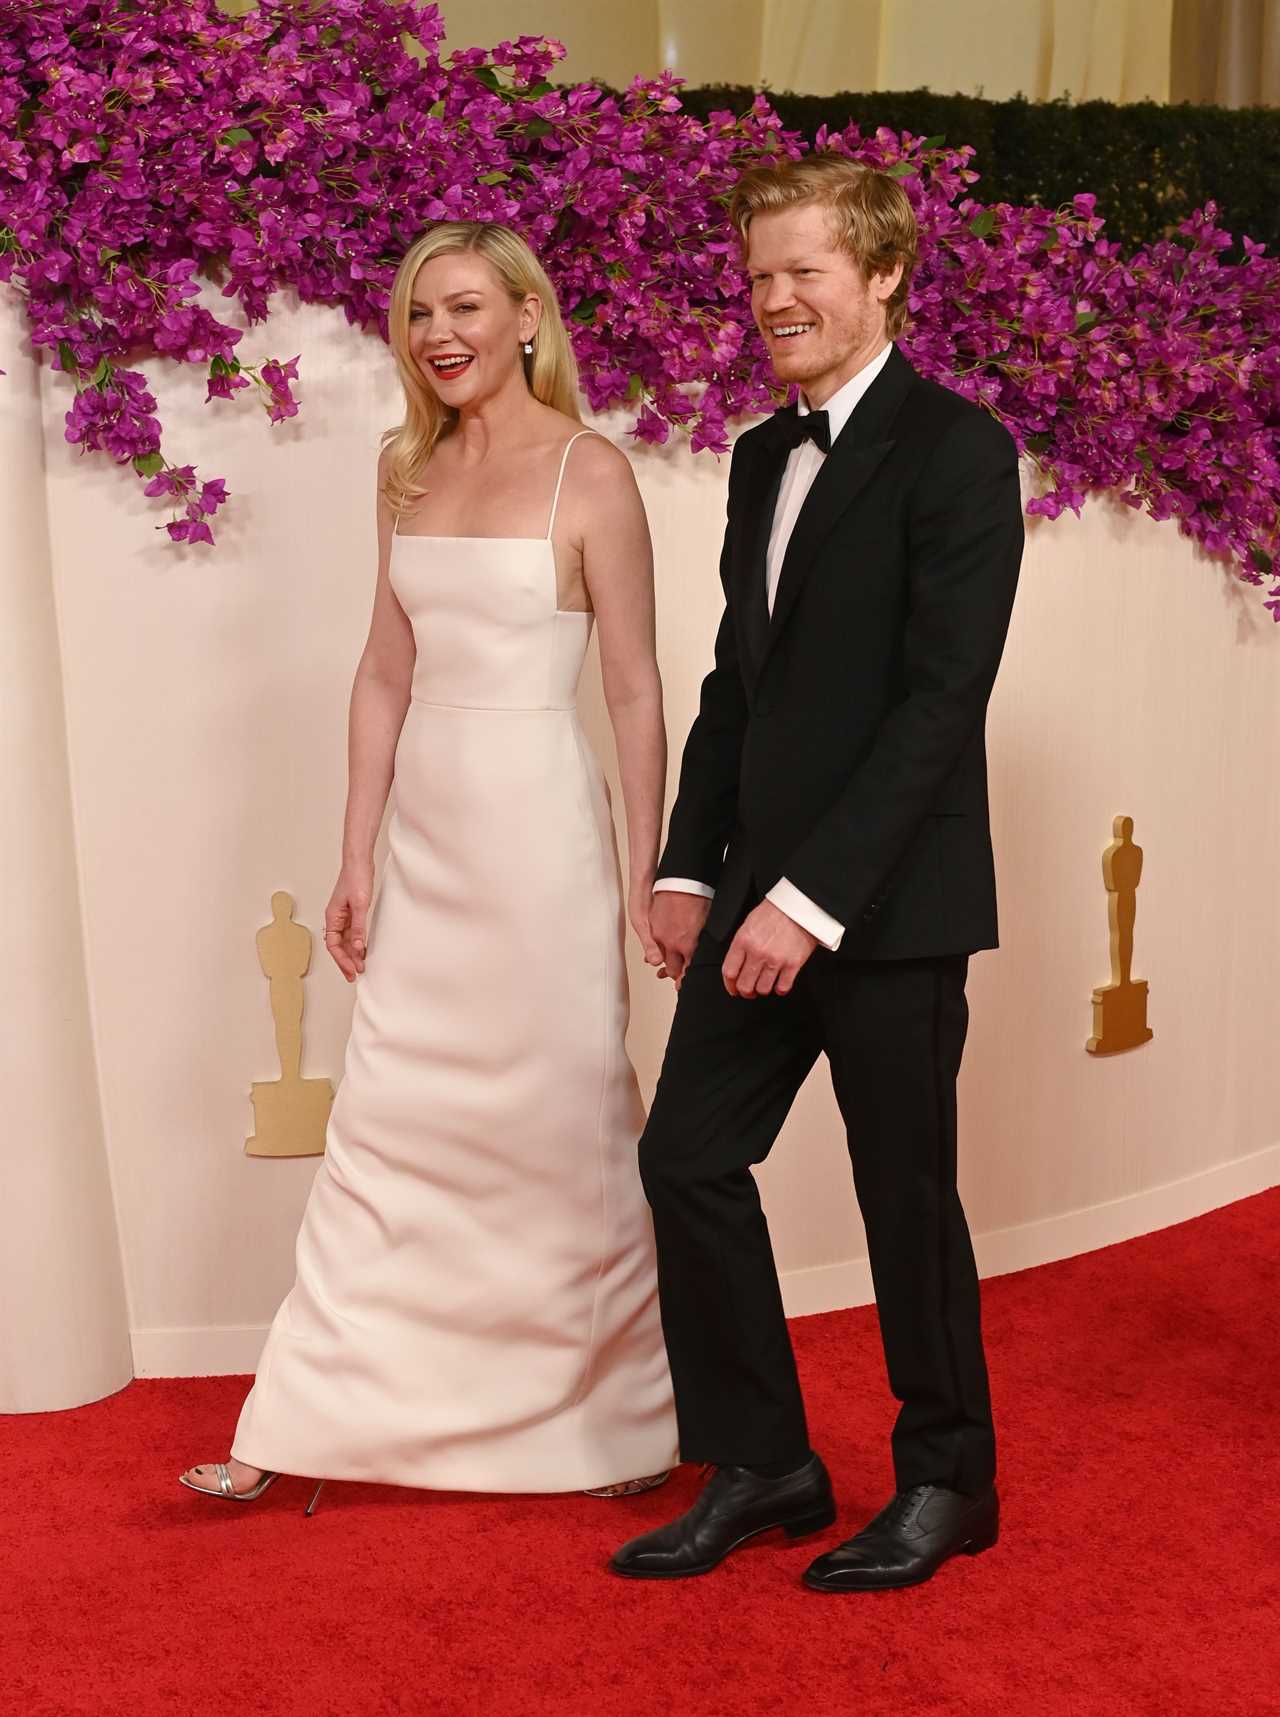 Kirsten Dunst’s husband Jesse Plemons saves the day at the Oscars